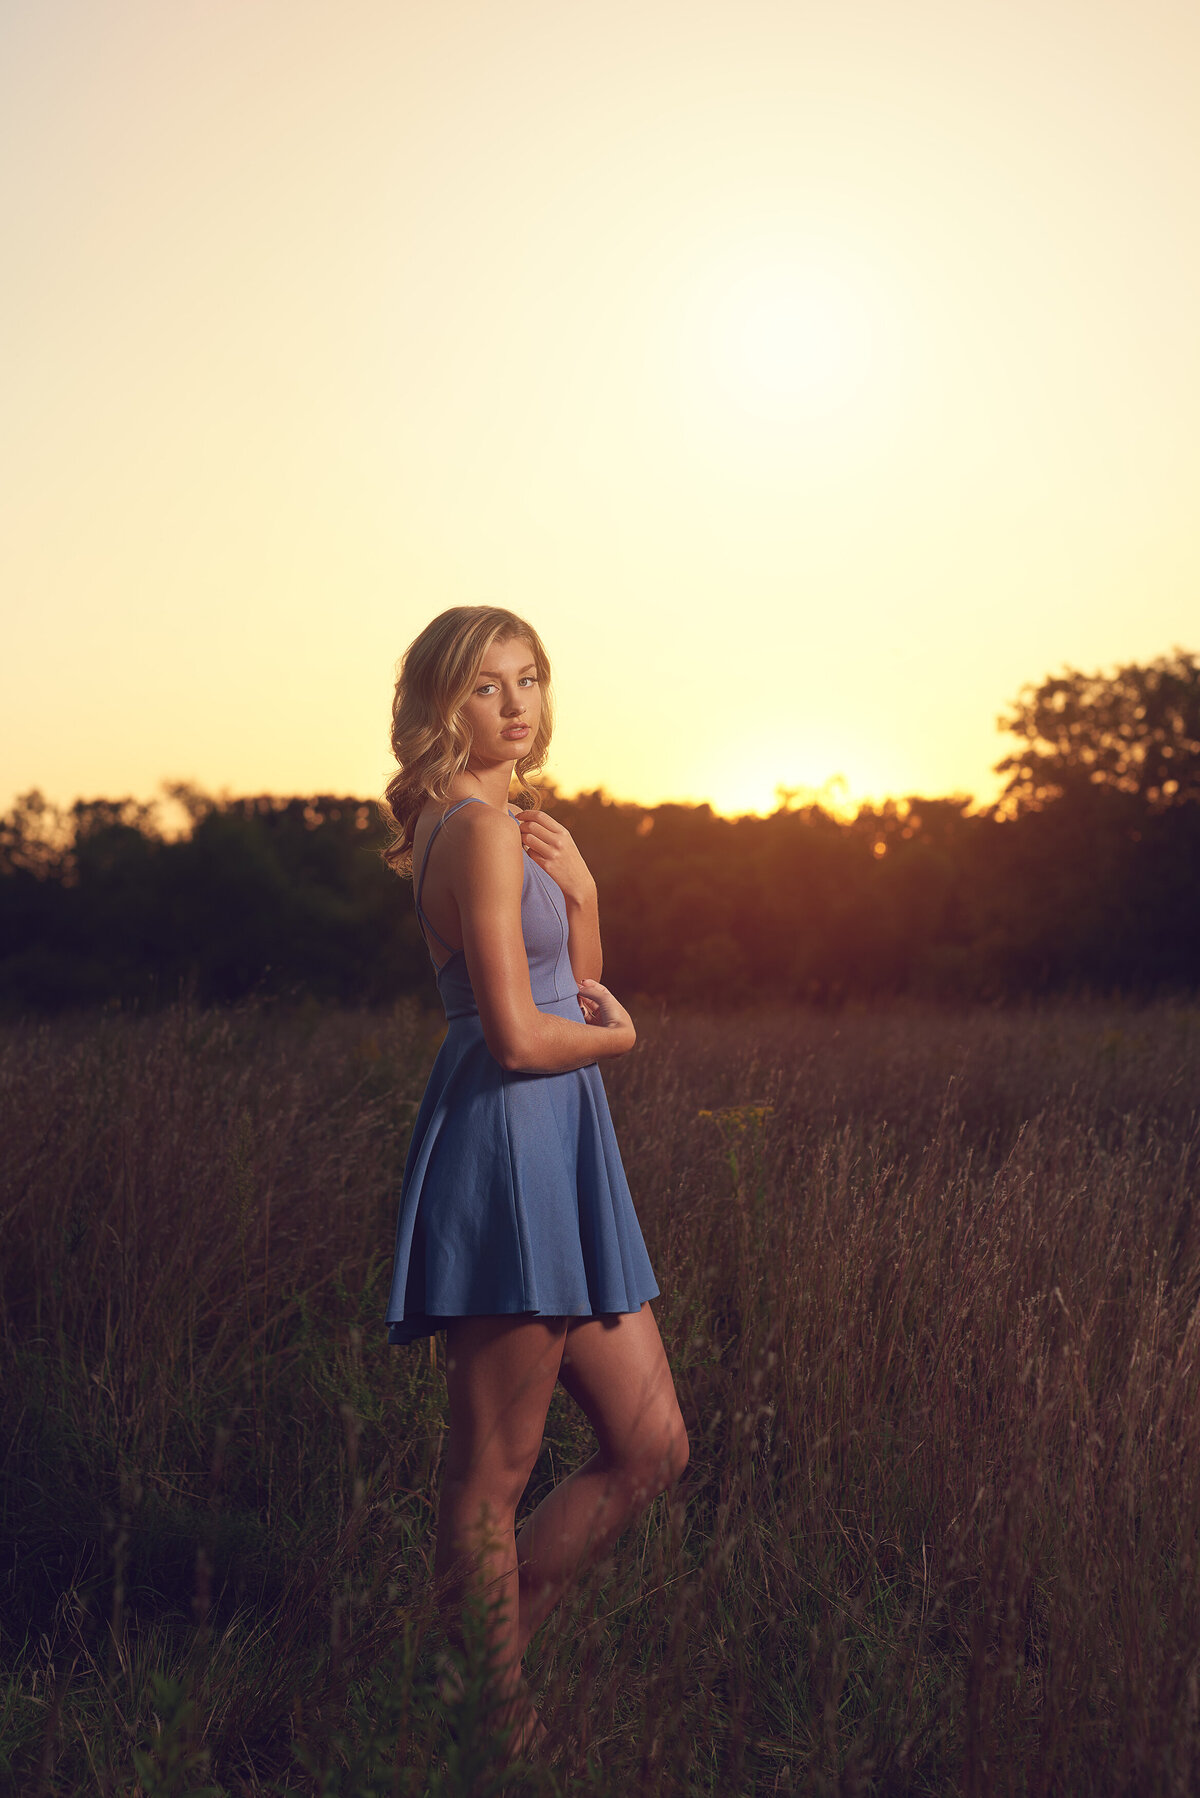 Sunset senior pictures in a field Minnesota1